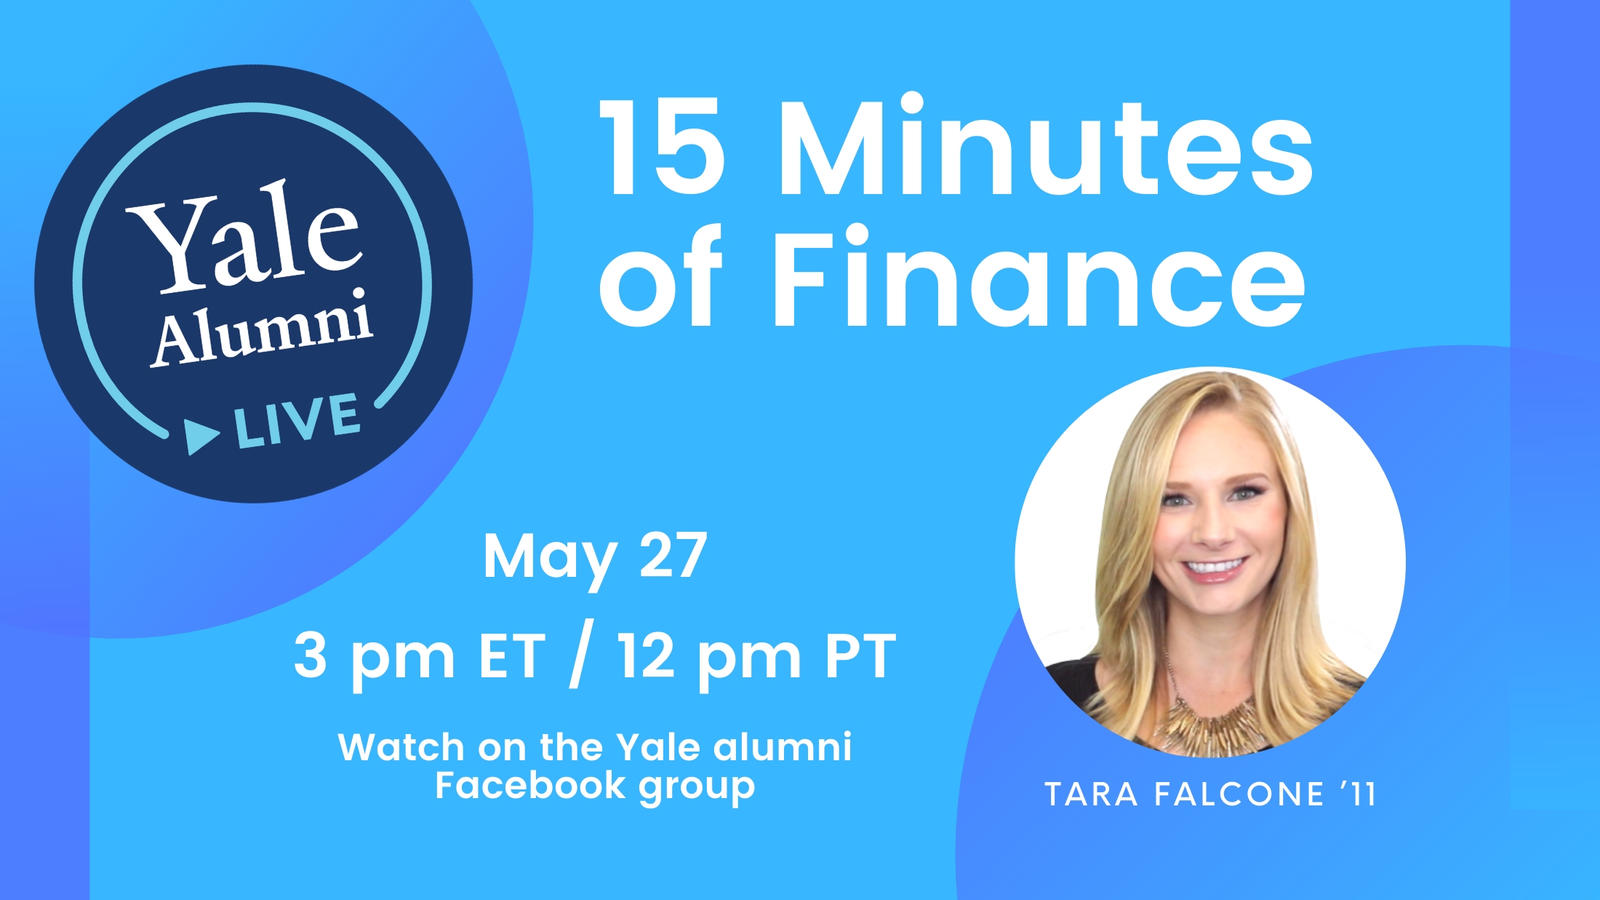 Graphic for Yale Alumni Live - Finance event, with Tara Falcone '11